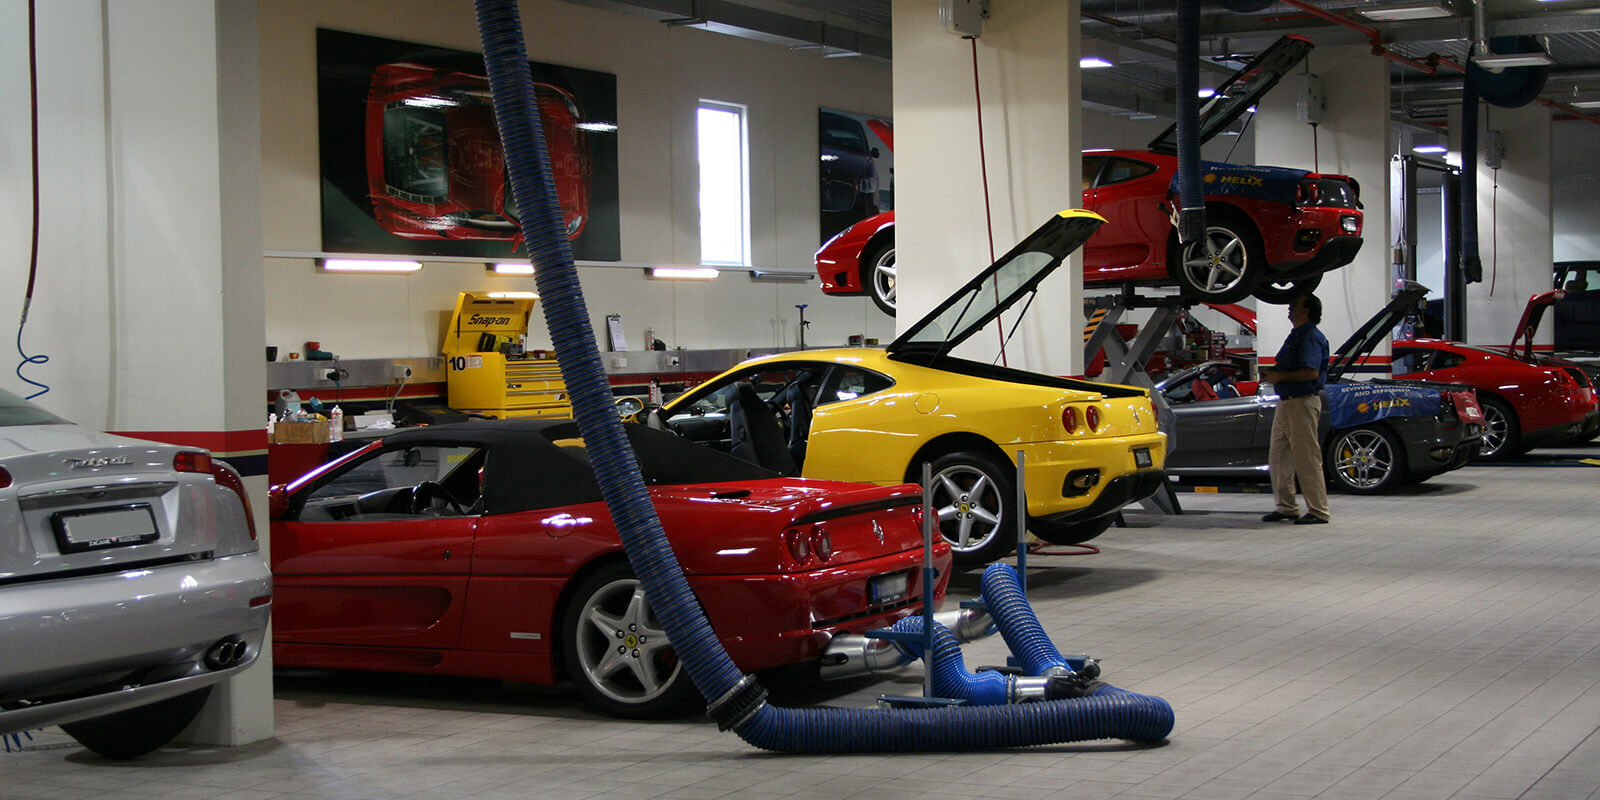 The fix is in: Ferrari owners should not have to wait a month for a service, according to local management.